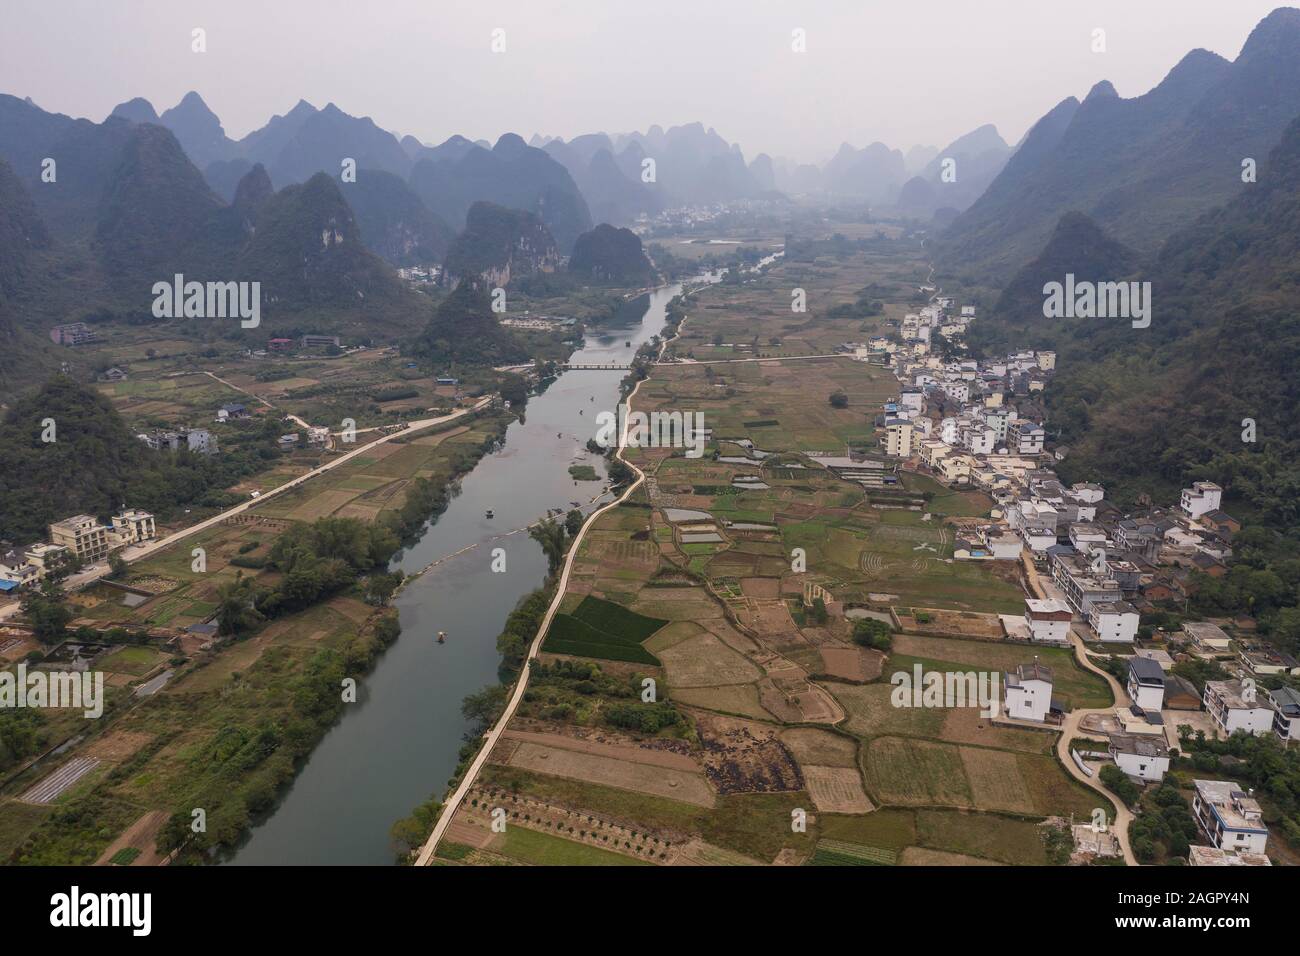 Aerial view of the countryside in Yangshuo in Guanxi province, China Stock Photo